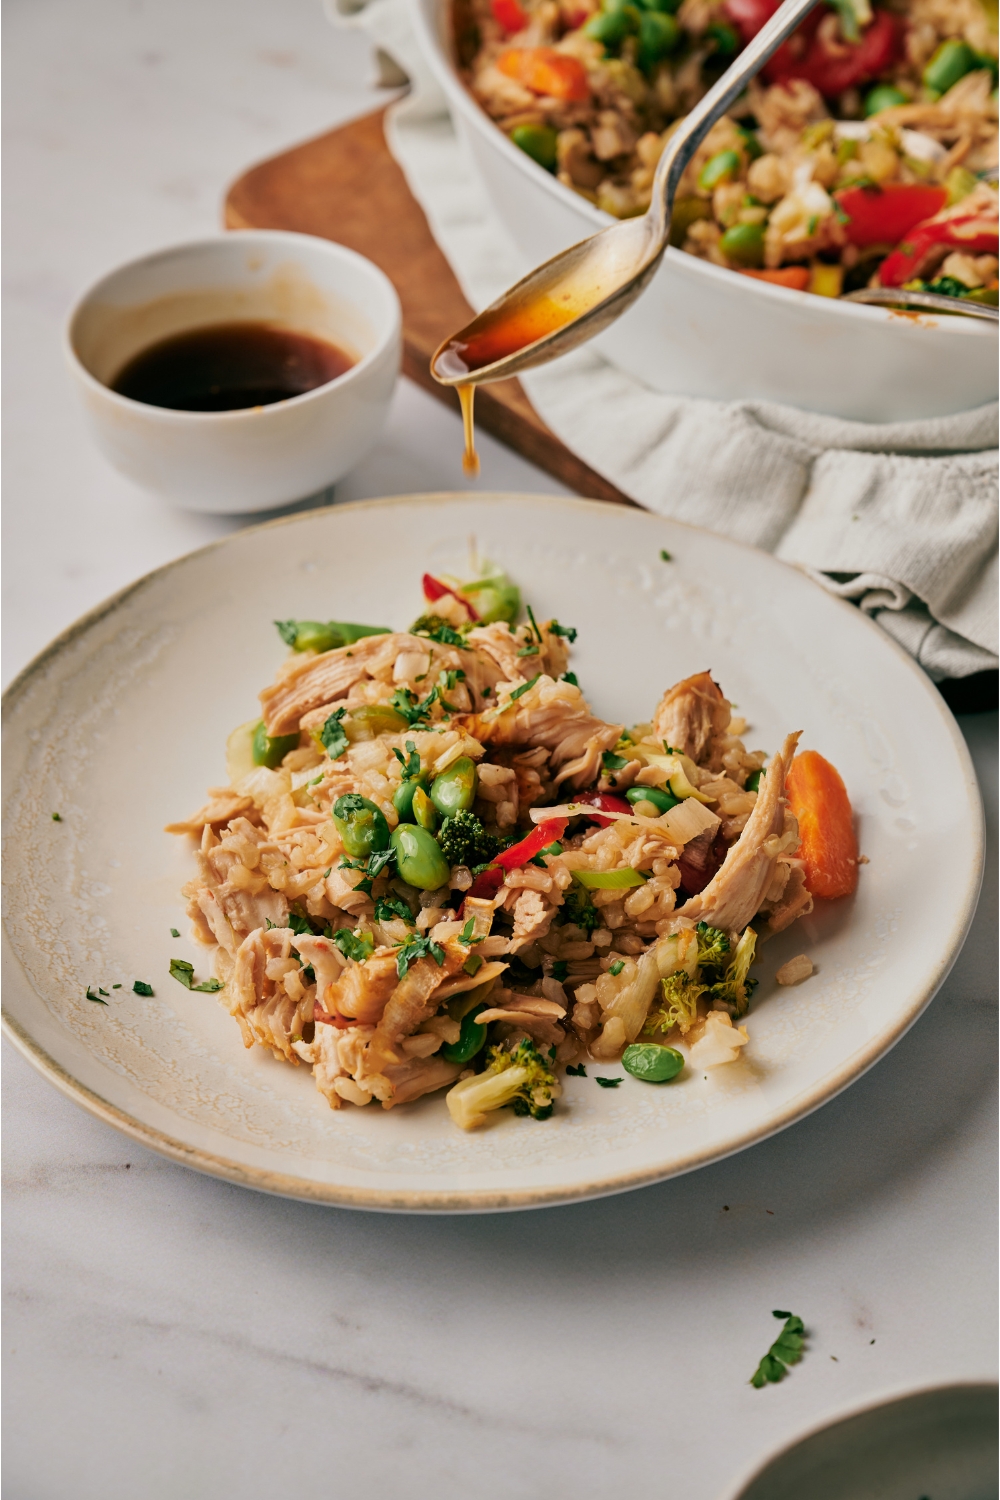 A spoon drizzling sauce over top of a plate of shredded chicken, brown rice, and stir-fried vegetables.